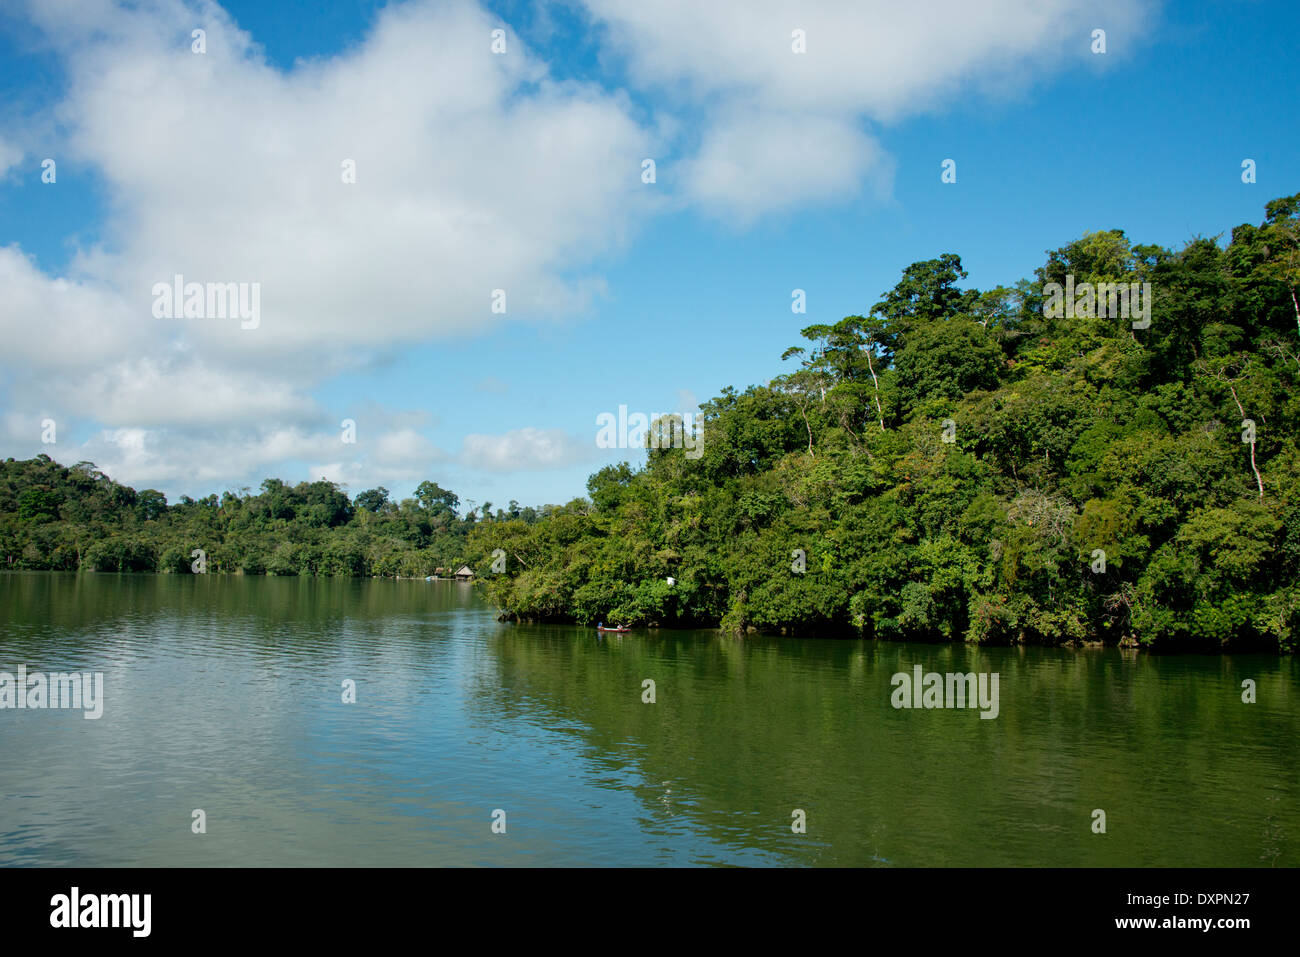 Guatemala, Department of Izabal, near the town of Livingston, Rio Dulce (Sweet Water) River. Jungle river view. Stock Photo